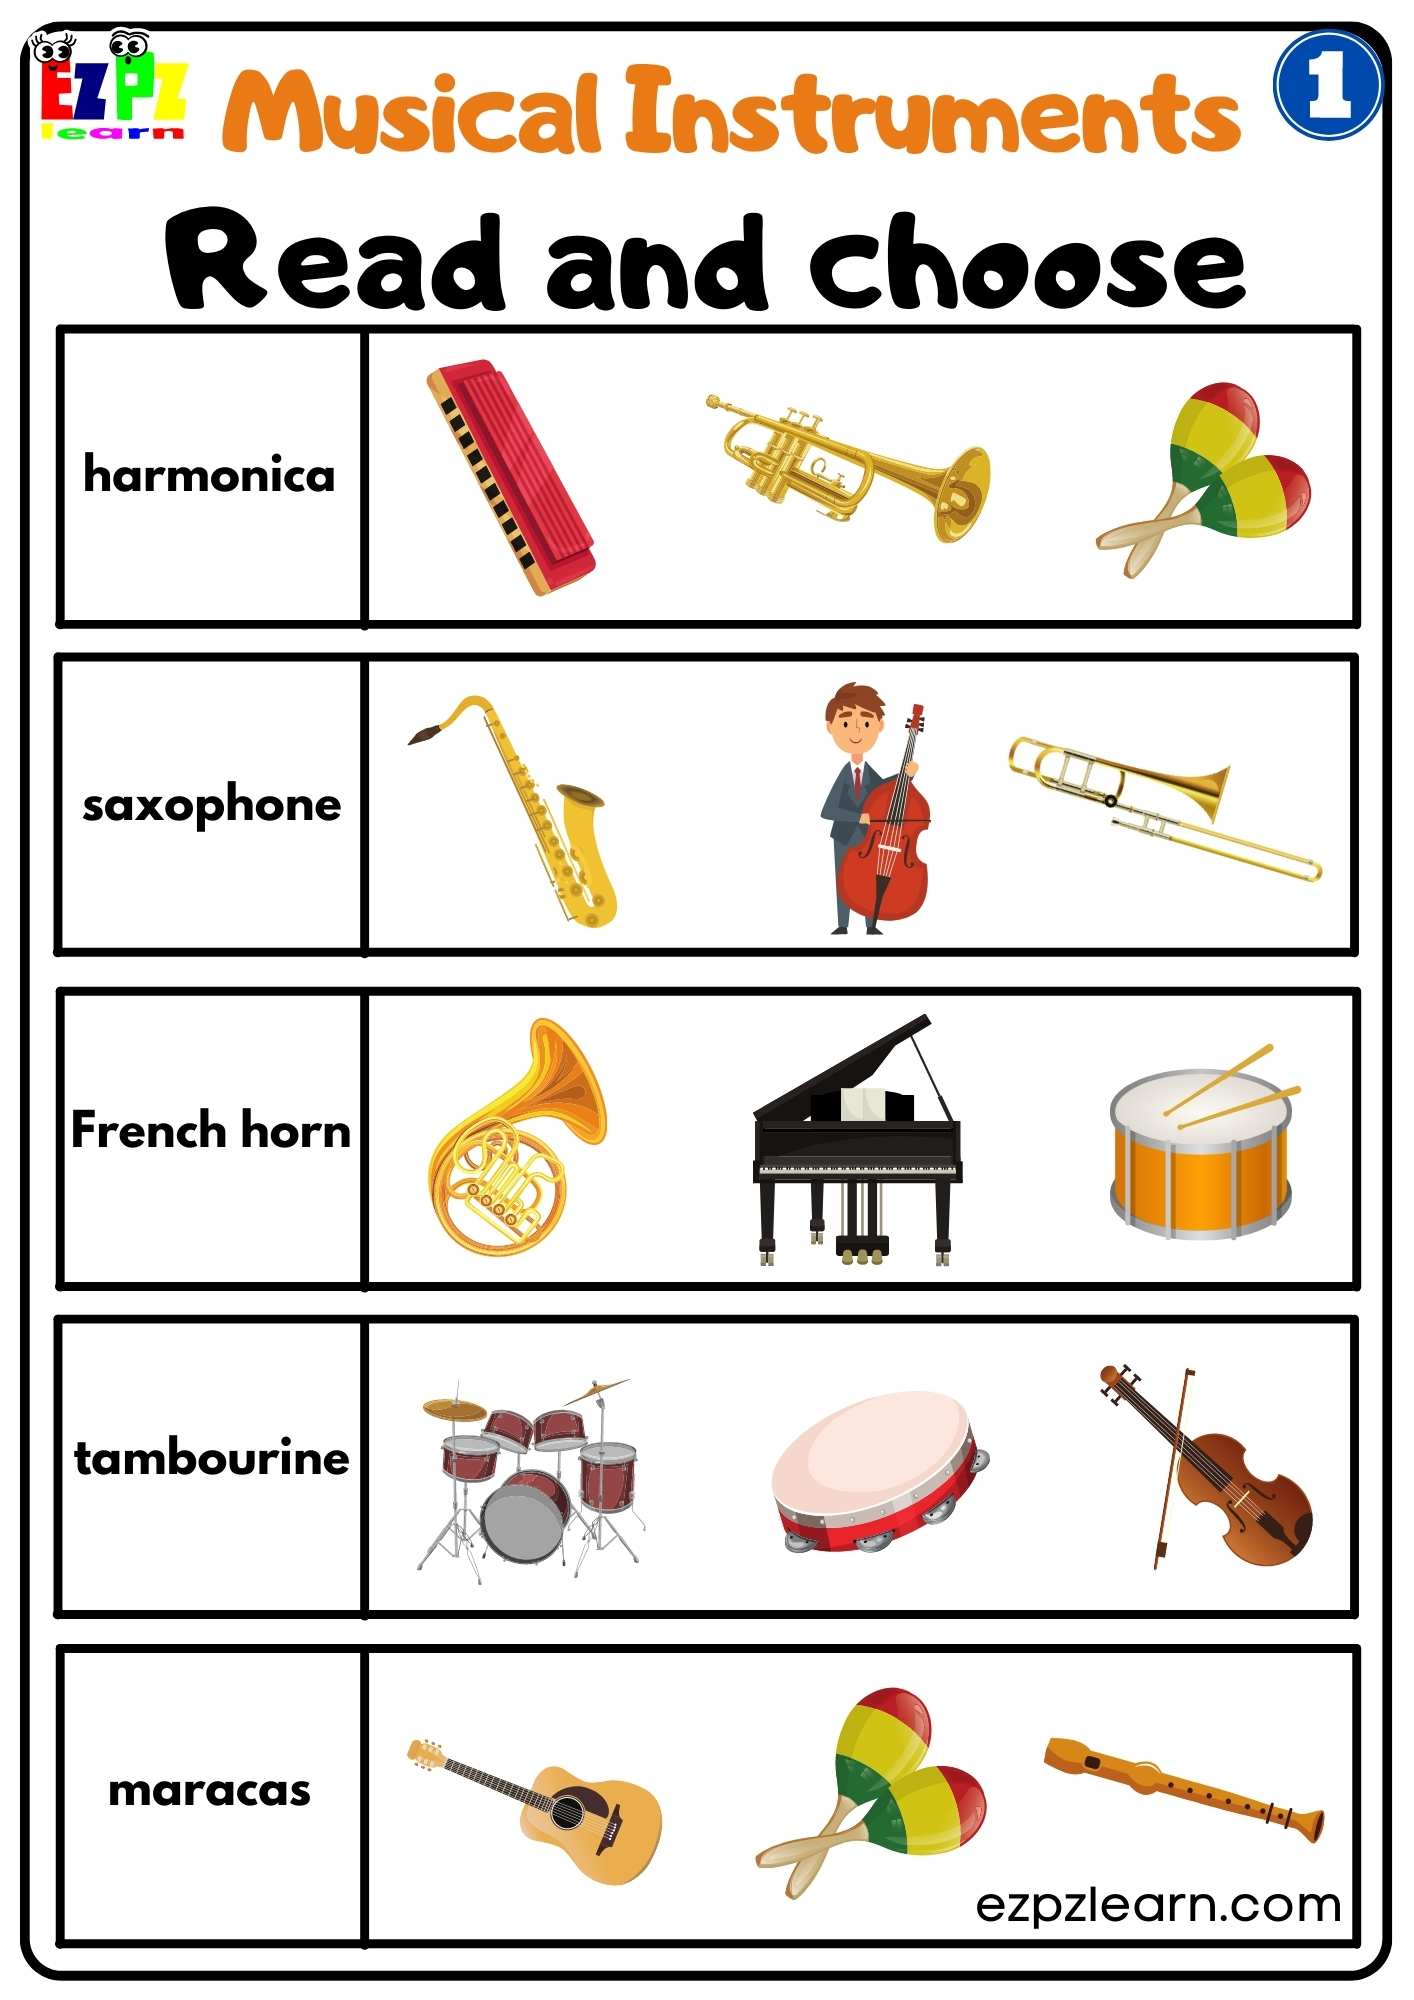 group-one-musical-instruments-read-and-choose-worksheet-free-pdf